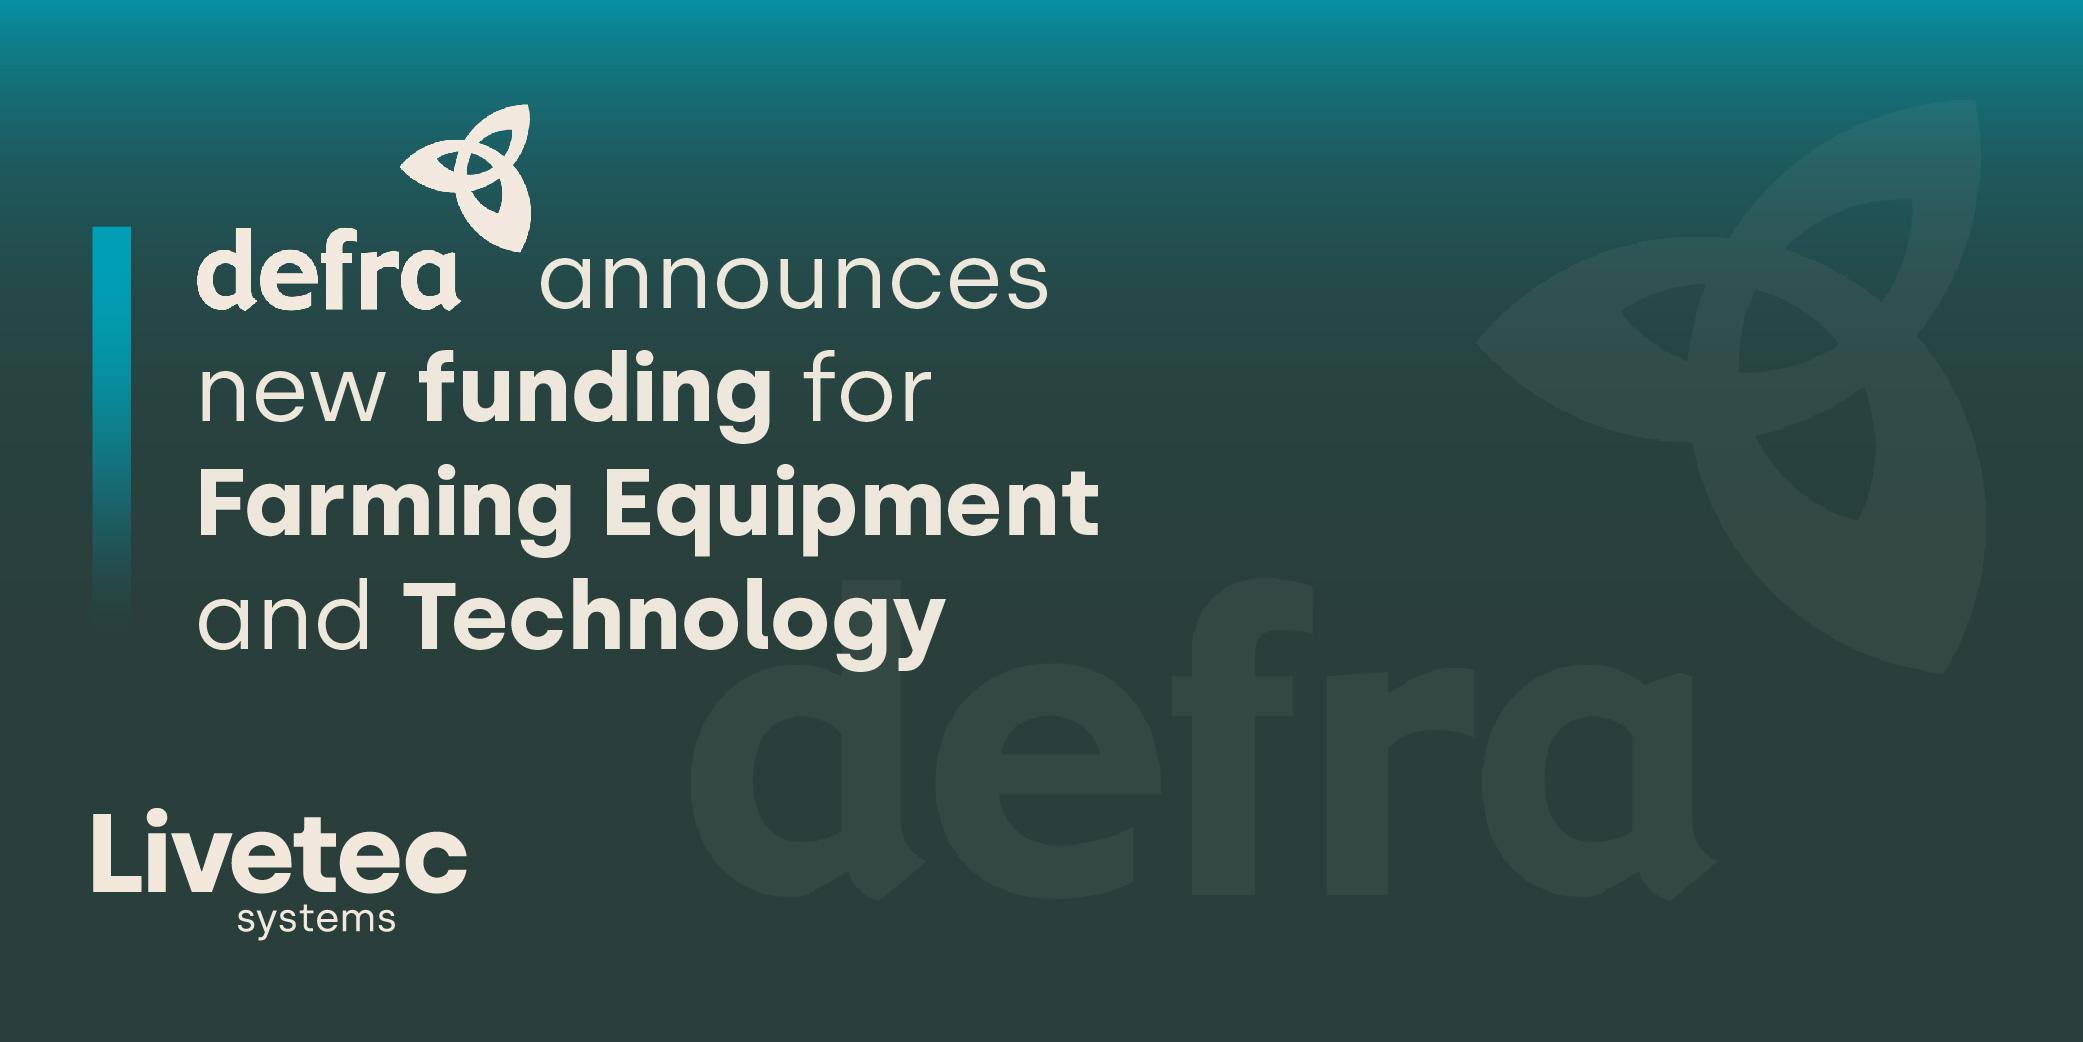 Defra announces new funding for Farming Equipment and Technology